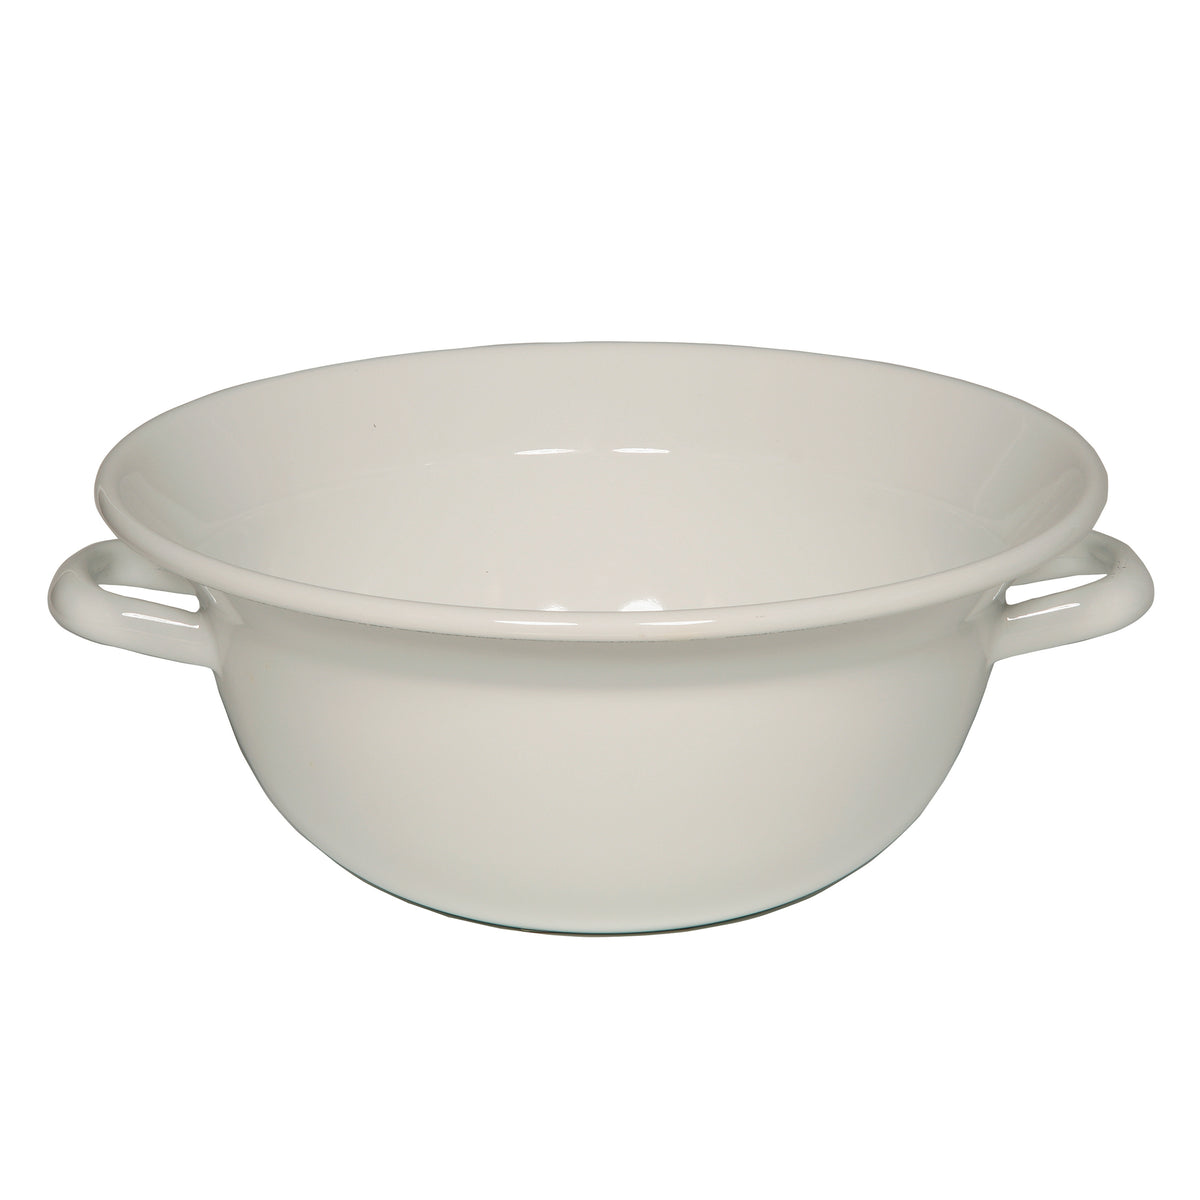 Riess, Large bowl with two handles, Plates & Bowls,